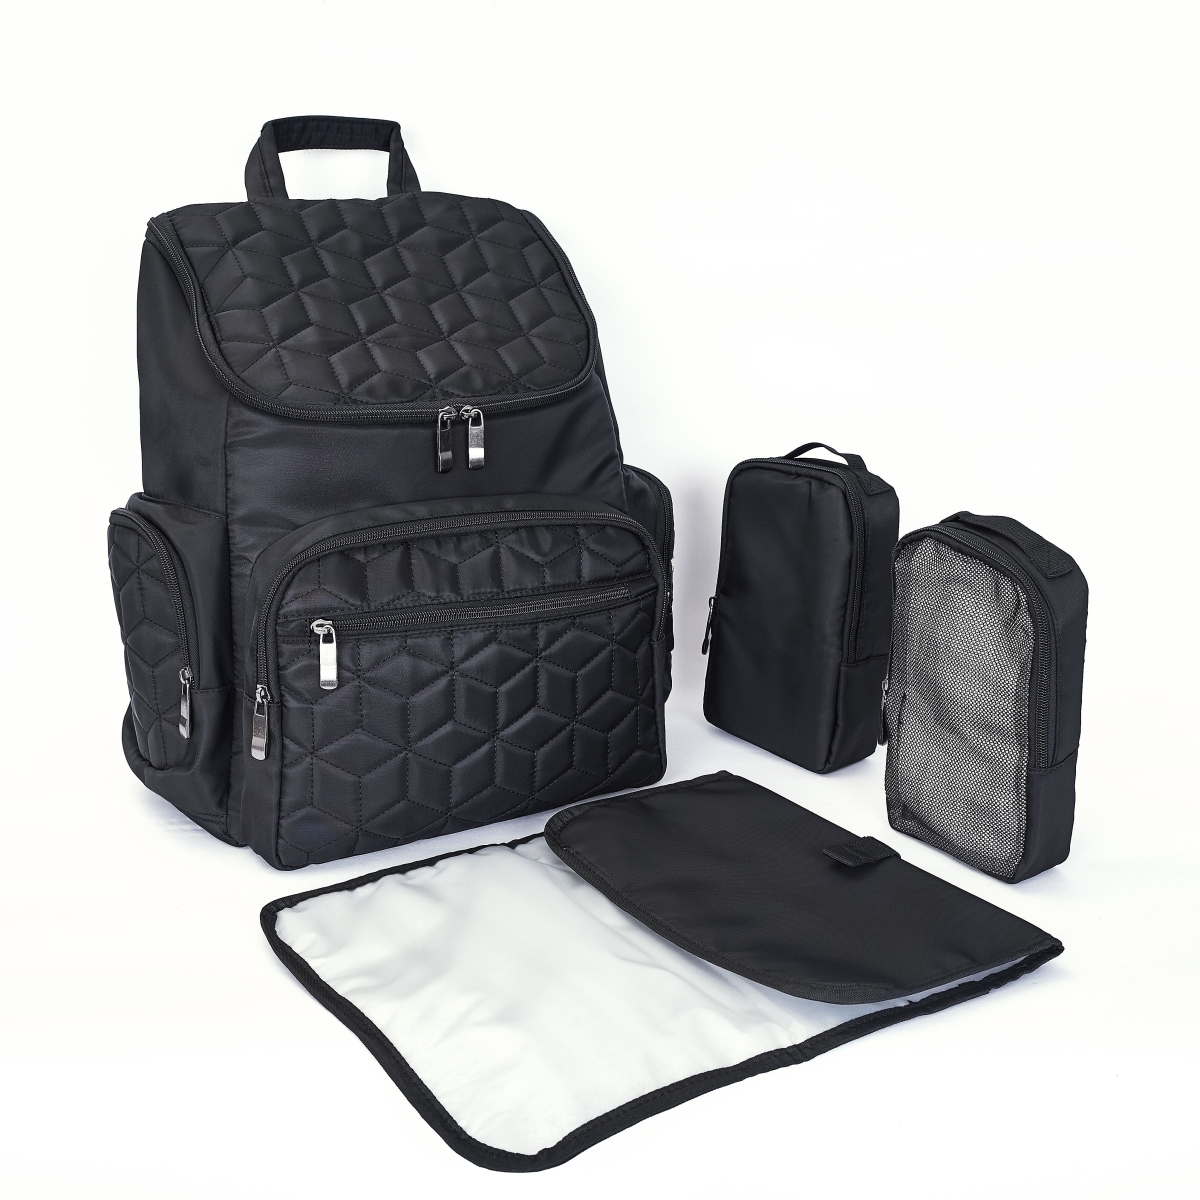 Dp1bk Textured Baby Diaper Bag, Waterproof With Changing Mat, Pockets & Insulated Pouch - Black